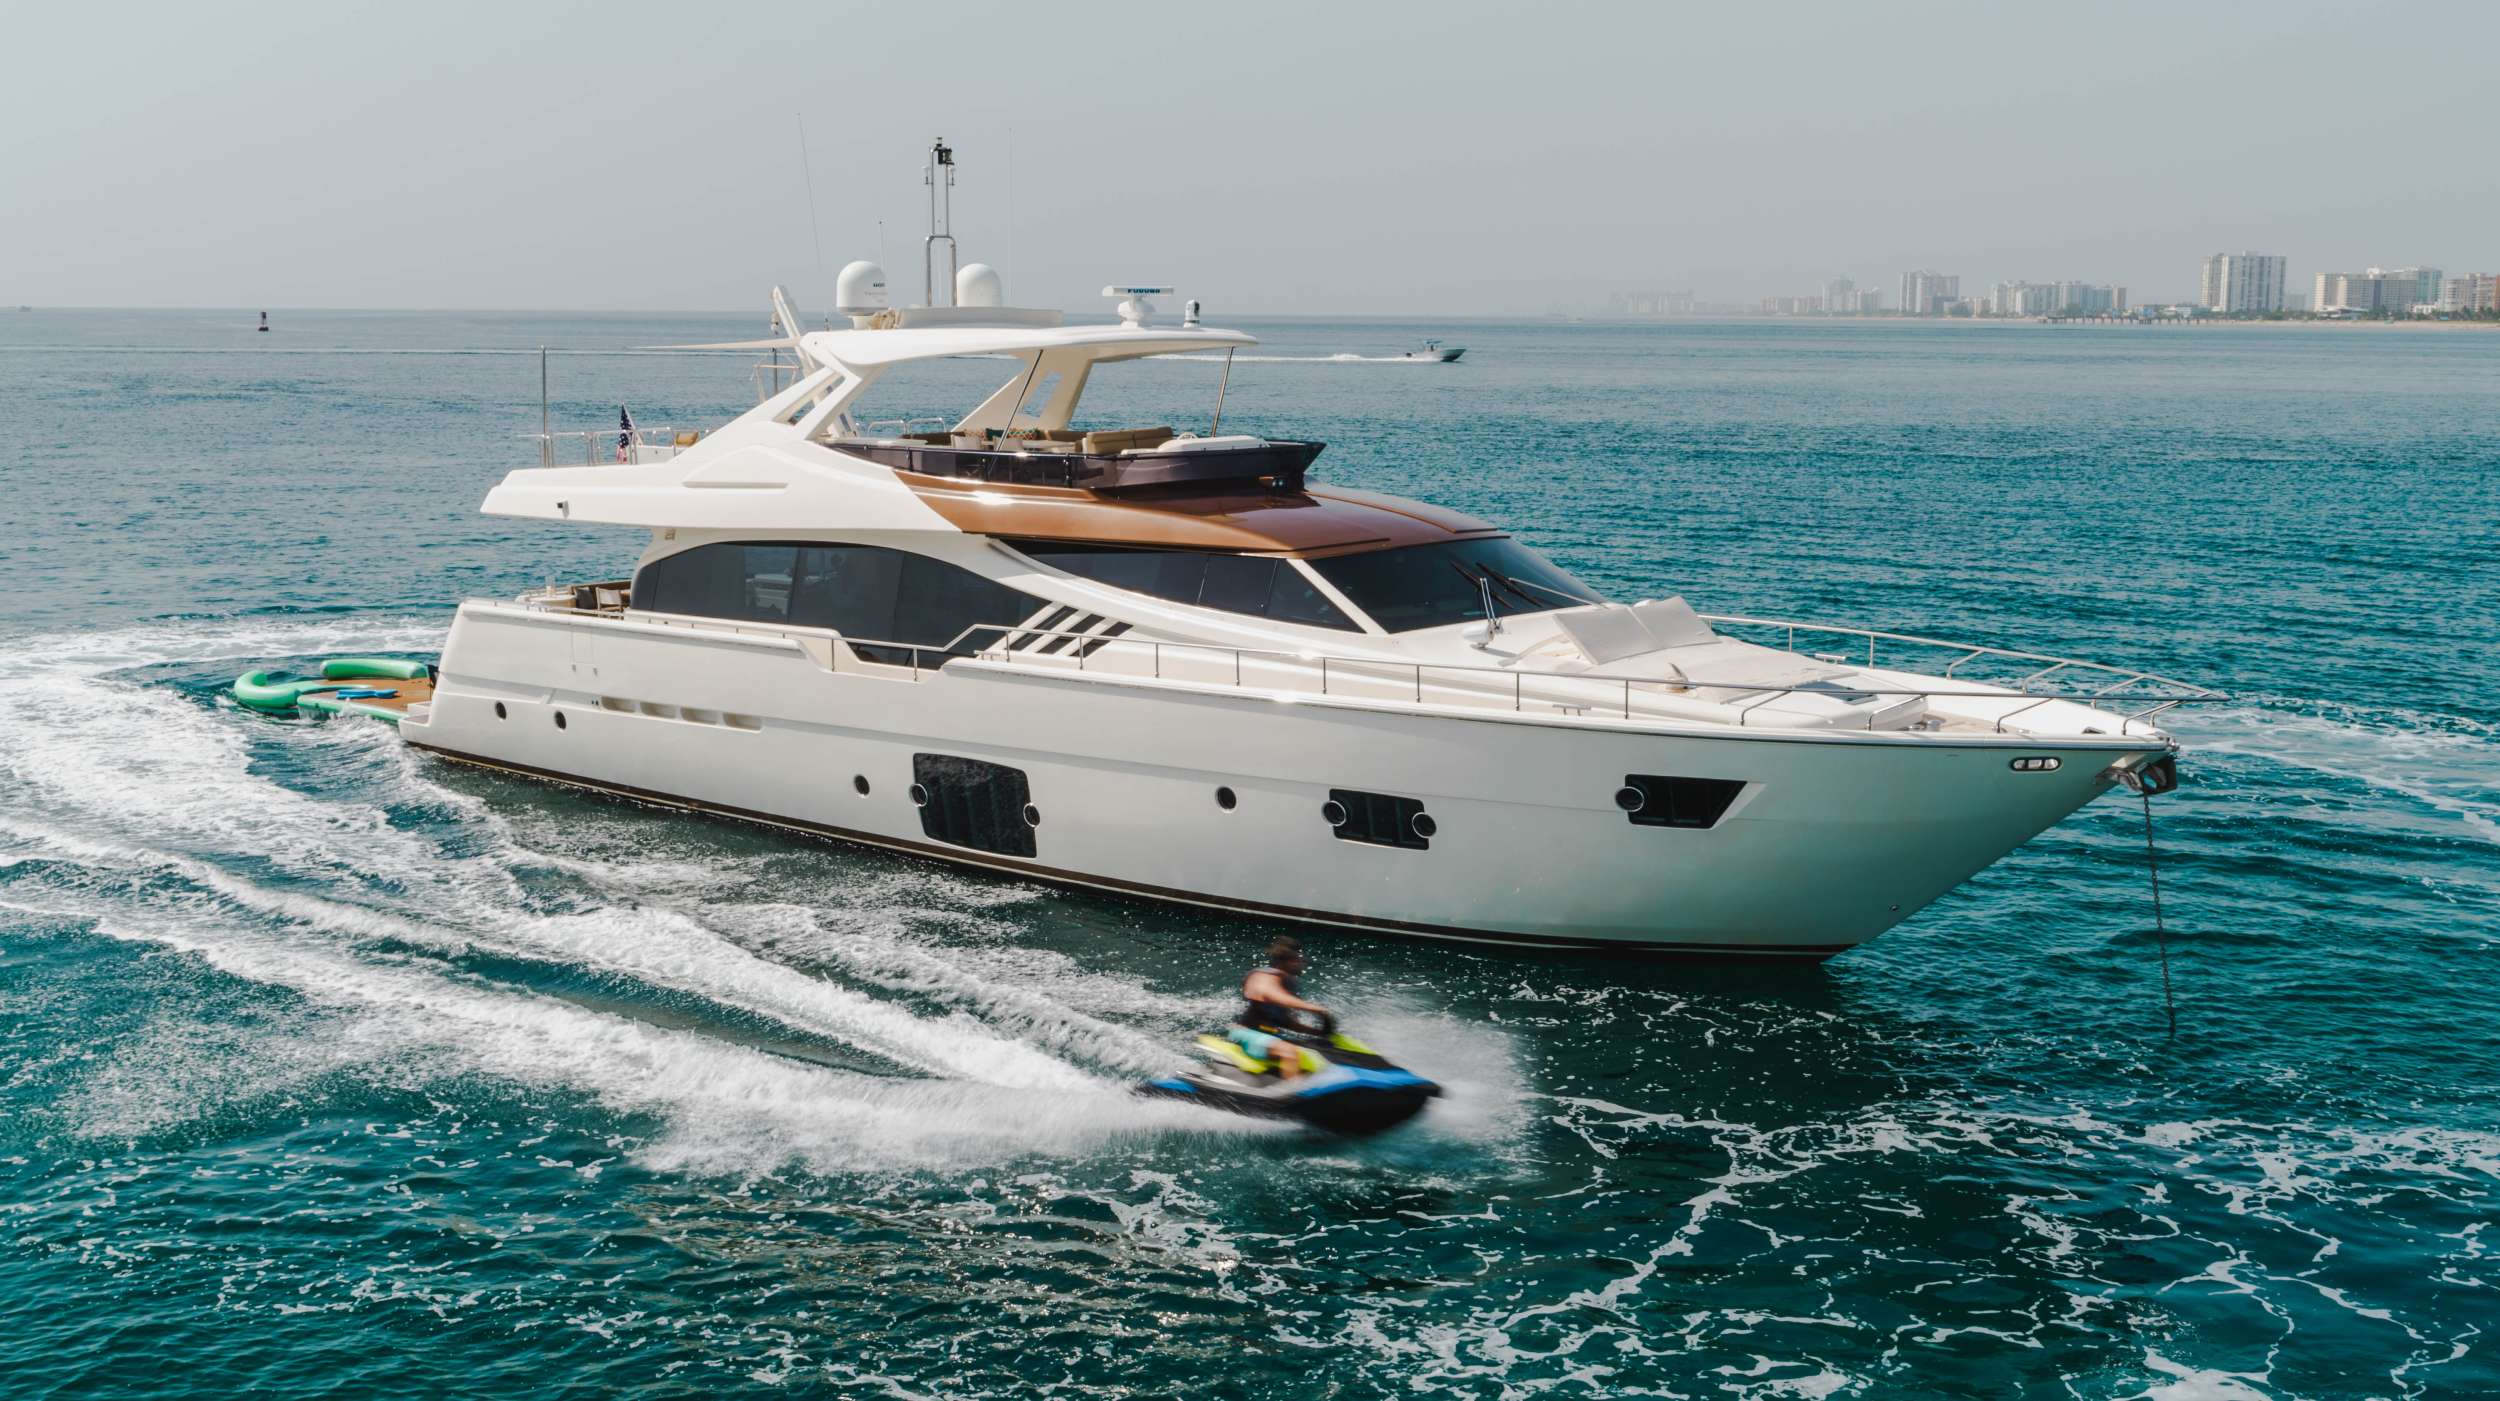 Top Shelf is a 87&prime;1&Prime; luxury motor yacht built by Ferretti in 2014. With a beam of 21ft and a draft of 6.5ft, This adds up to a gross tonnage of 133 tons. She is powered by twin MTU engines of 1950 hp each giving her a maximum speed of 30 knots and a cruising speed of 22 knots with a maximum range is estimated at 400 nautical miles. She has two 23kw Onan Generators, a 60 gallon a minute fresh water maker, twin washer/dryer combos and three icemakers. 10 brand new 10,000 lumen Underwater lights were just installed as well. Top Shelf is also equipped with two internal anti roll gyro stabilizers to make your stay as comfortable as possible.
The motor yacht can accommodate 8 guests in 4 cabins. Each cabin has its own bathroom and shower as well as a separate day head on the main deck. The Flybridge is very spacious with a retractable roof to give you unobstructed views as well as a sunbed with adjustable headrests. The Bow has a spacious sunbed with retractable headrests that will comfortably fit 4 people.
Top Shelf has a garage that when in the down position doubles as a beachfront so that you can hangout at the waters edge. 

M/Y Top Shelf Is Best Described As A Family Fun Style Yachting Experience 

14ft Jet tender, SeaDoo Spark Jetski, 2x SeaBobs, 10x10 Floating Pad, Bote Hangout, Snorkeling Gear, Numerous Floats, Wake Board, KneeBoard, Towing Tubes, 2x Paddle Boards, 5x Land Electric Scooters, Beach Games Including Volleyball, Flag Football, Bocceball, and Badminton. 
We Also Have A Full Beach Setup Including Beach Games, Bonfire (Where allowed), Barbeque, Tents, Beach Chairs, Hammocks and More
4 bedrooms (king, 2 queens and 2 twins) all with their own bathroom and 1 day head upstairs. 

The crew are more than happy to take photos &amp; videos during our clients stay so that they always have something to remember the trip. Our photography equipment consists of: a DSLR Camera, GoPros, DJI stabilised pocket camera, cell phones and of course our DJI Mavic 2 Pro. All photos are uploaded every night to a google drive which is accessed by a QR code displayed in the salon for our clients to reminisce at the end of the day.